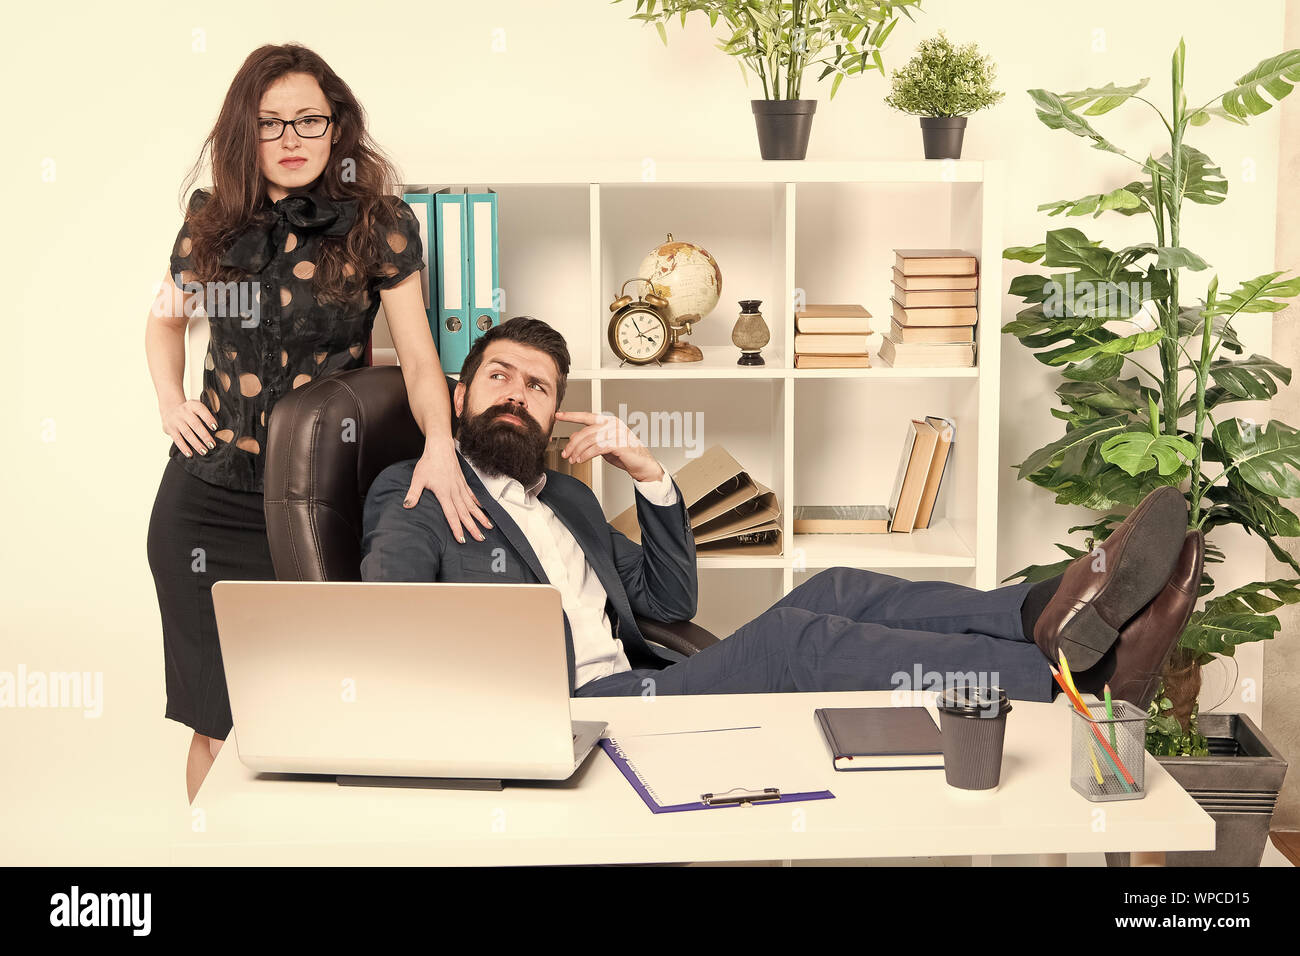 Lazy boss office. Offer massage. Man bearded hipster boss sit in leather armchair office interior. Boss and secretary girl at workplace. Relations at work. Business people and staff concept. Stock Photo